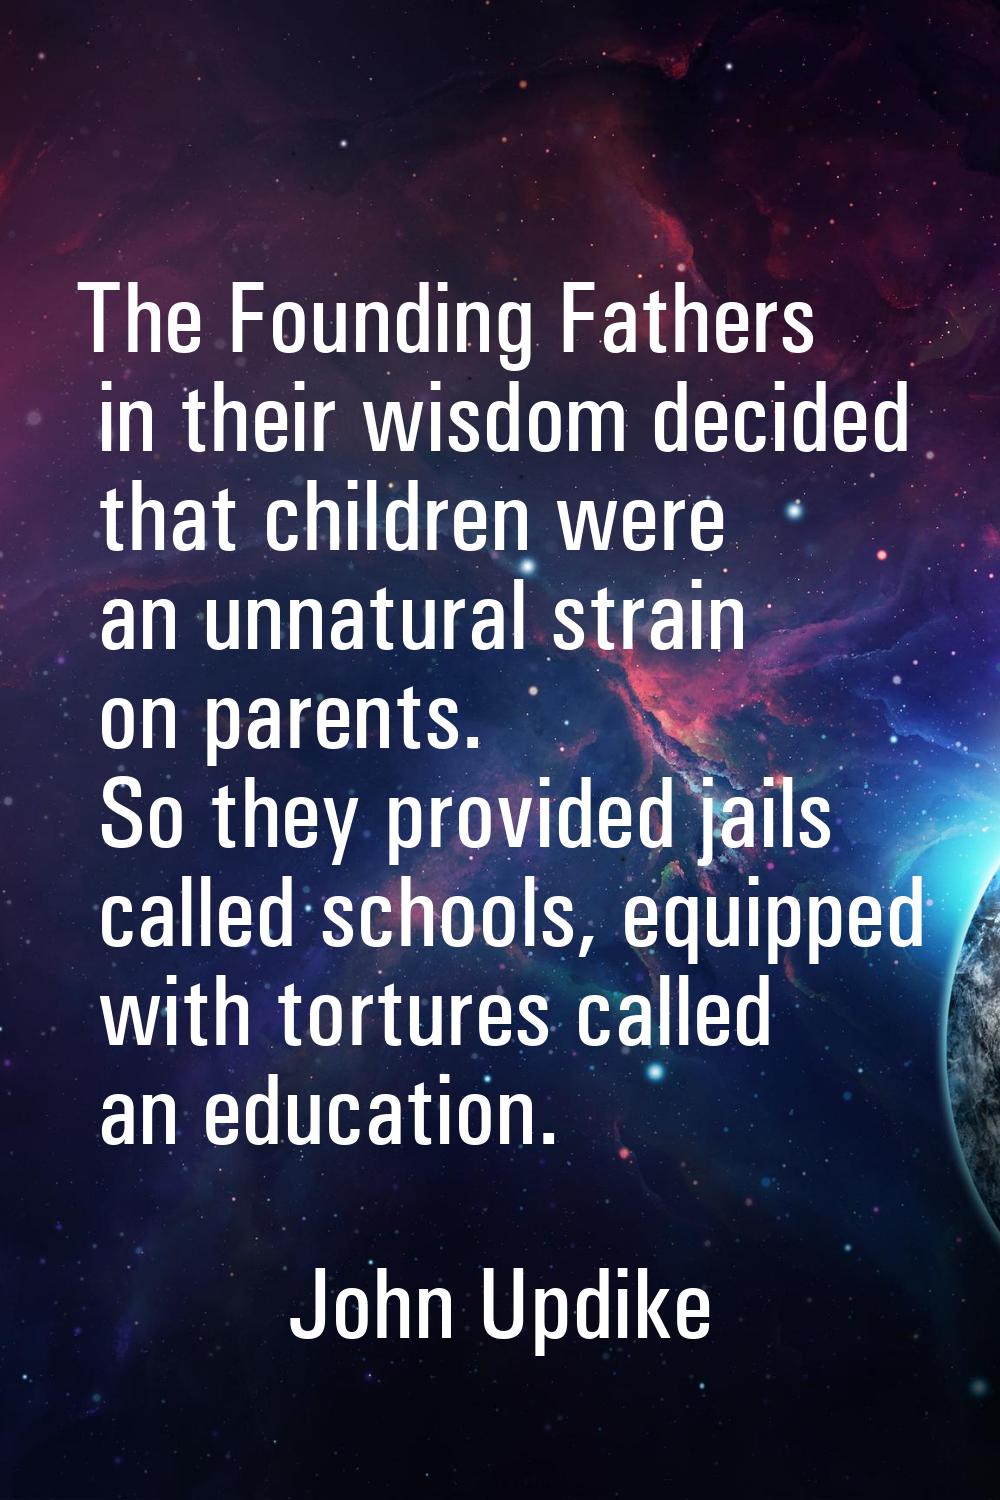 The Founding Fathers in their wisdom decided that children were an unnatural strain on parents. So 